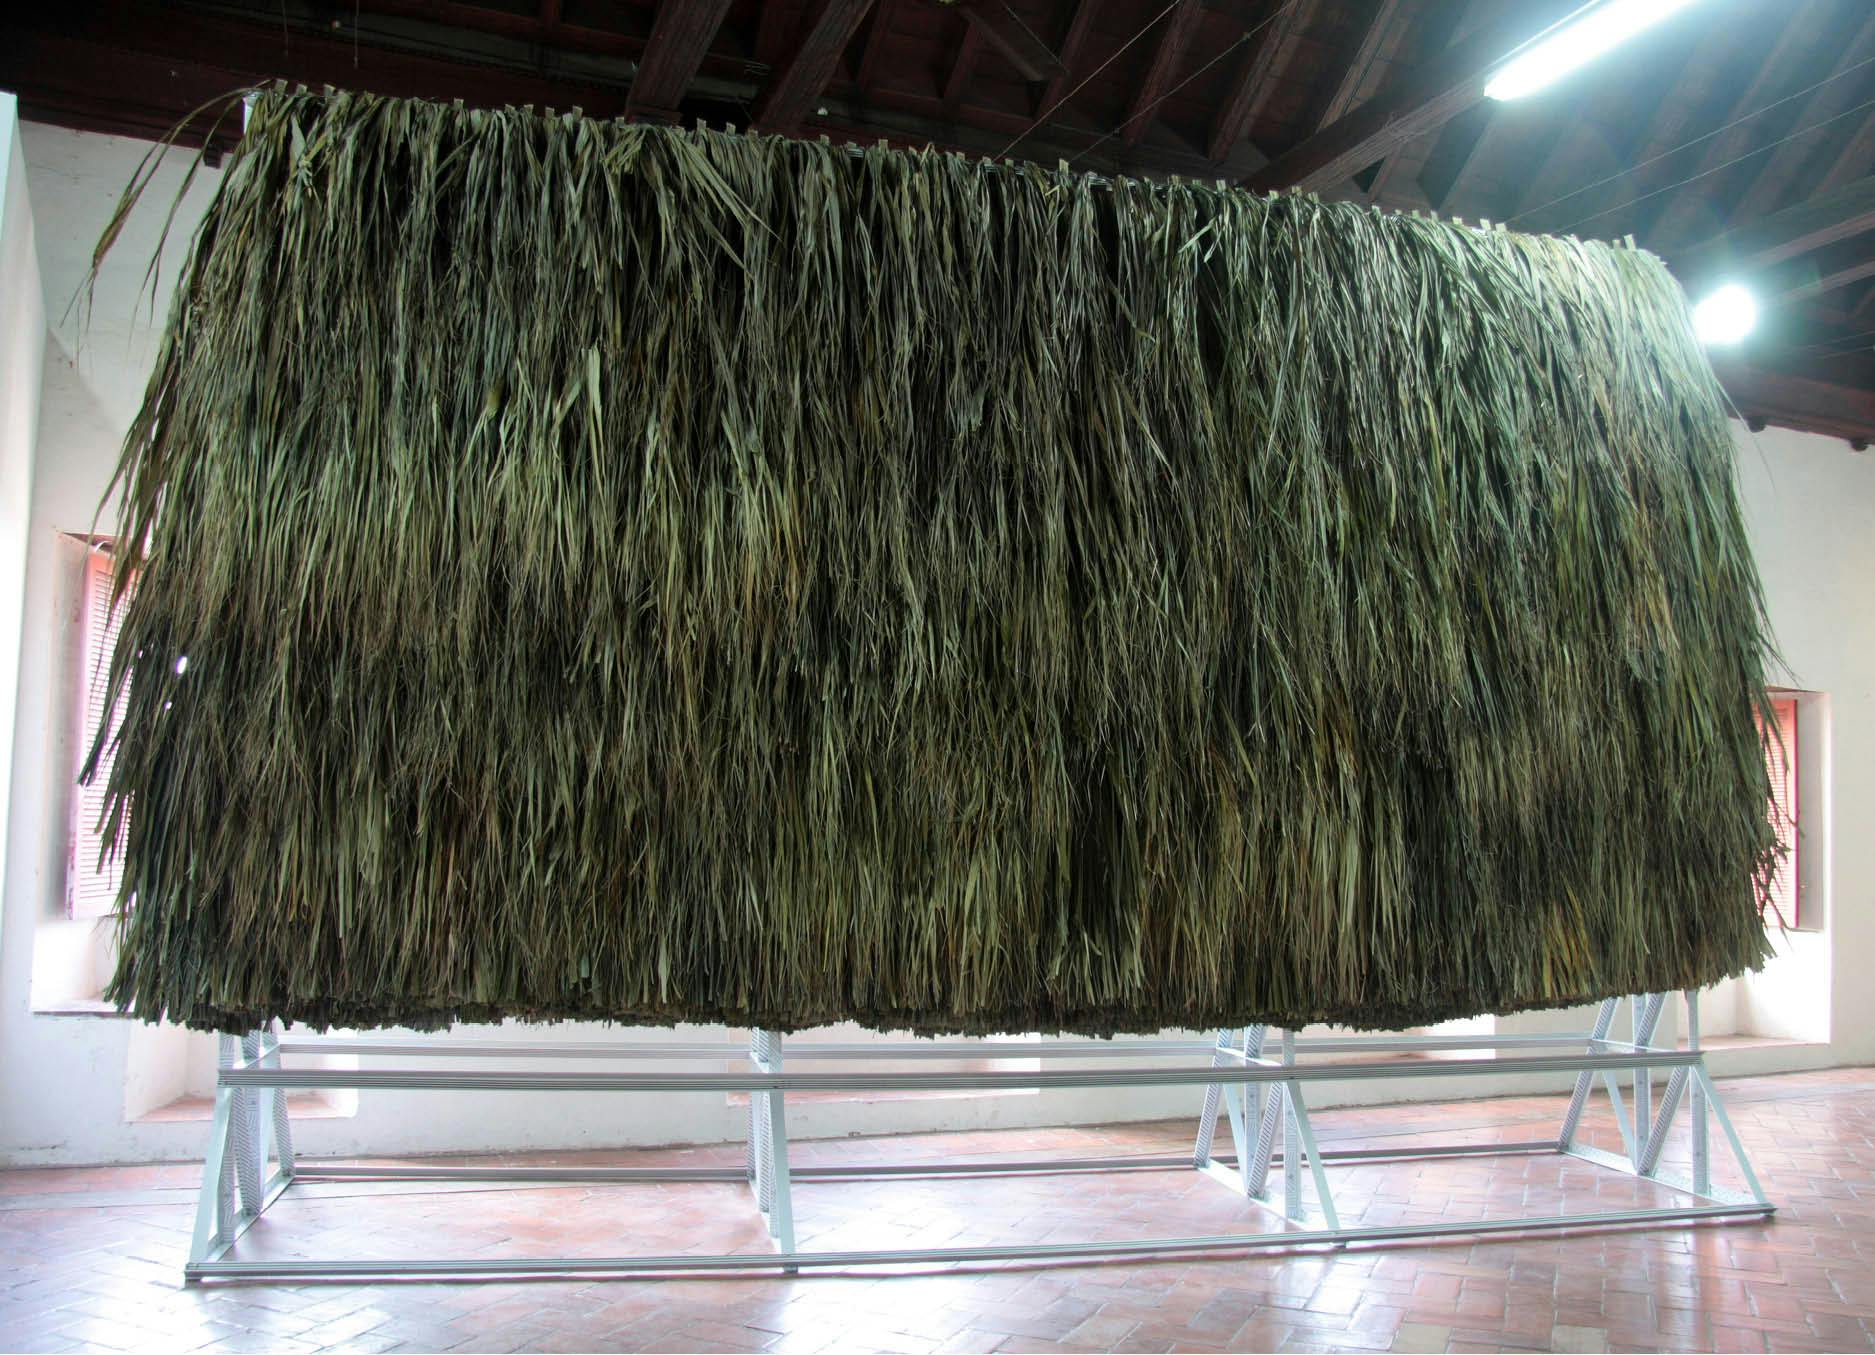 Decorated structure (productive public) by artist Henry Coleman, produced for Salon nacional de Artistas, Cartagena, Colombia, a large wall of palapa thatch is mounted onto decorated white aluminum frame